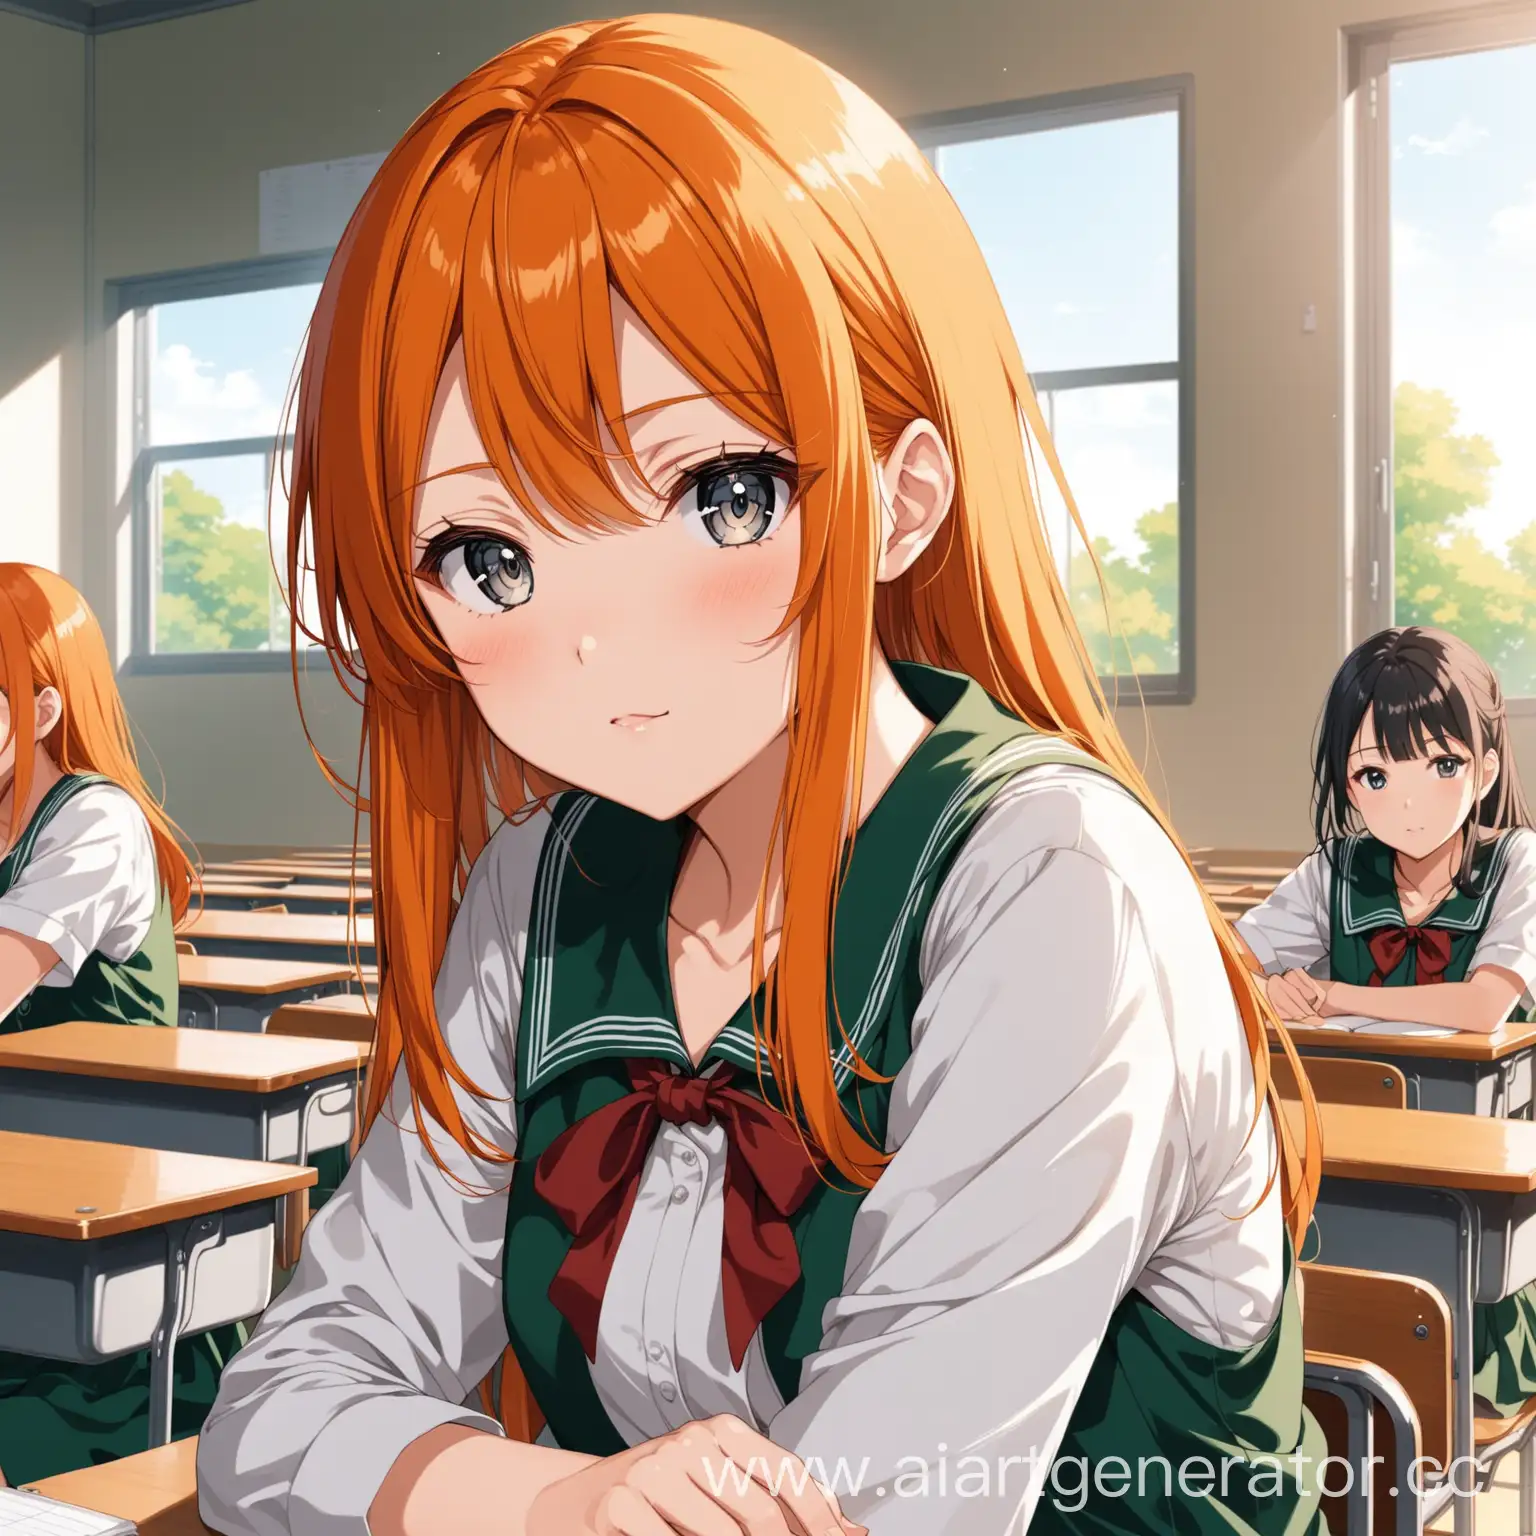 Anime girl with orange hair and gray eyes is sitting in a classroom